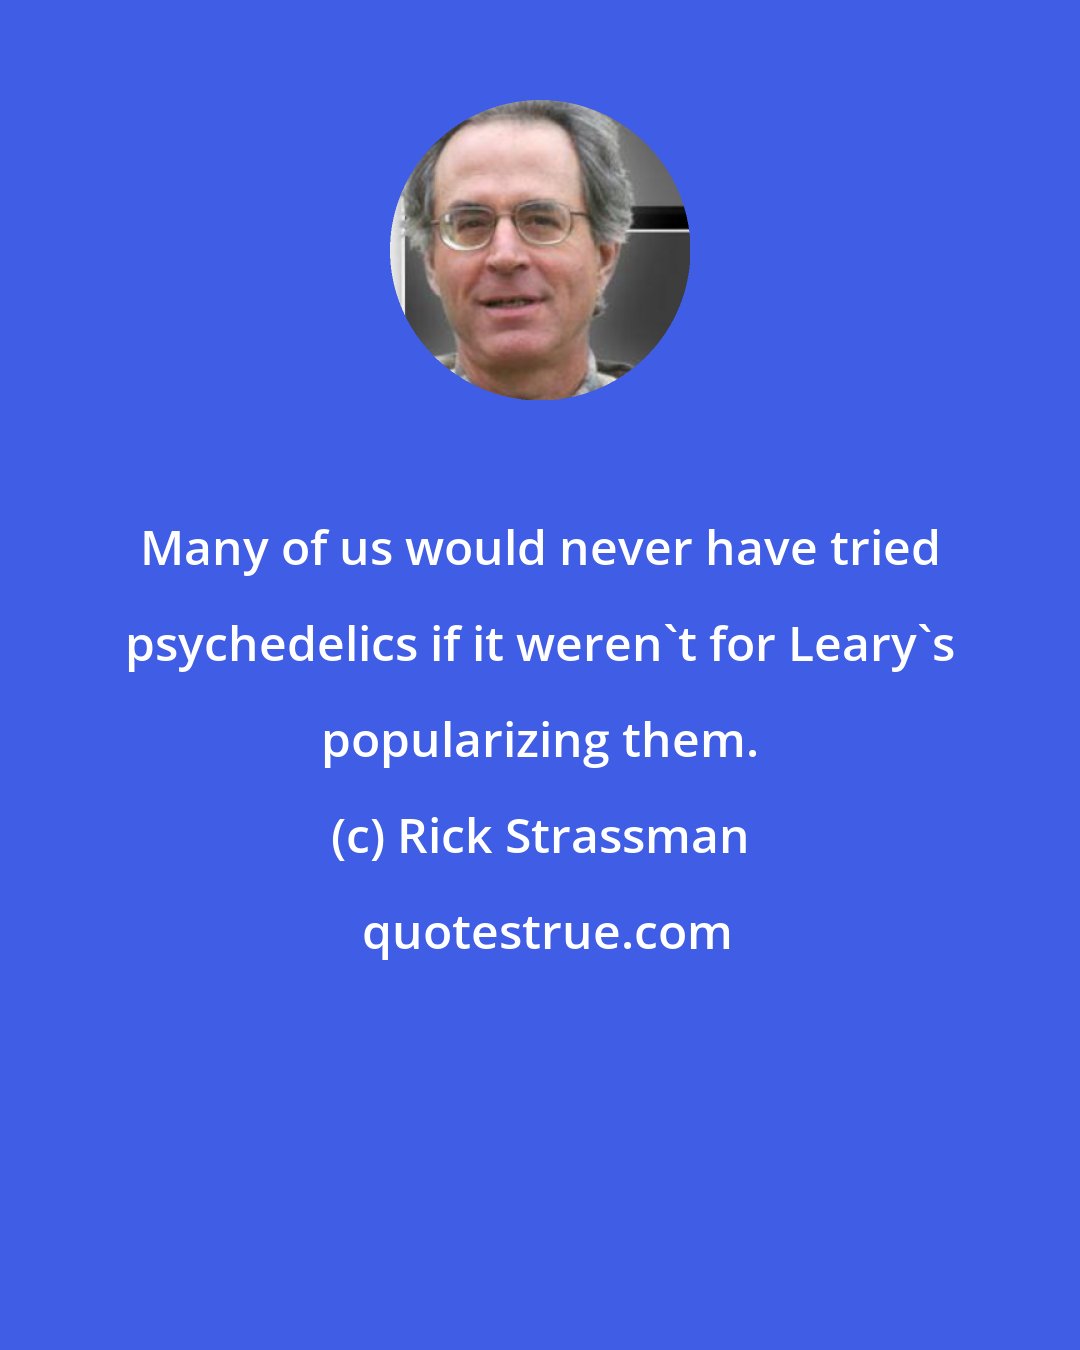 Rick Strassman: Many of us would never have tried psychedelics if it weren't for Leary's popularizing them.